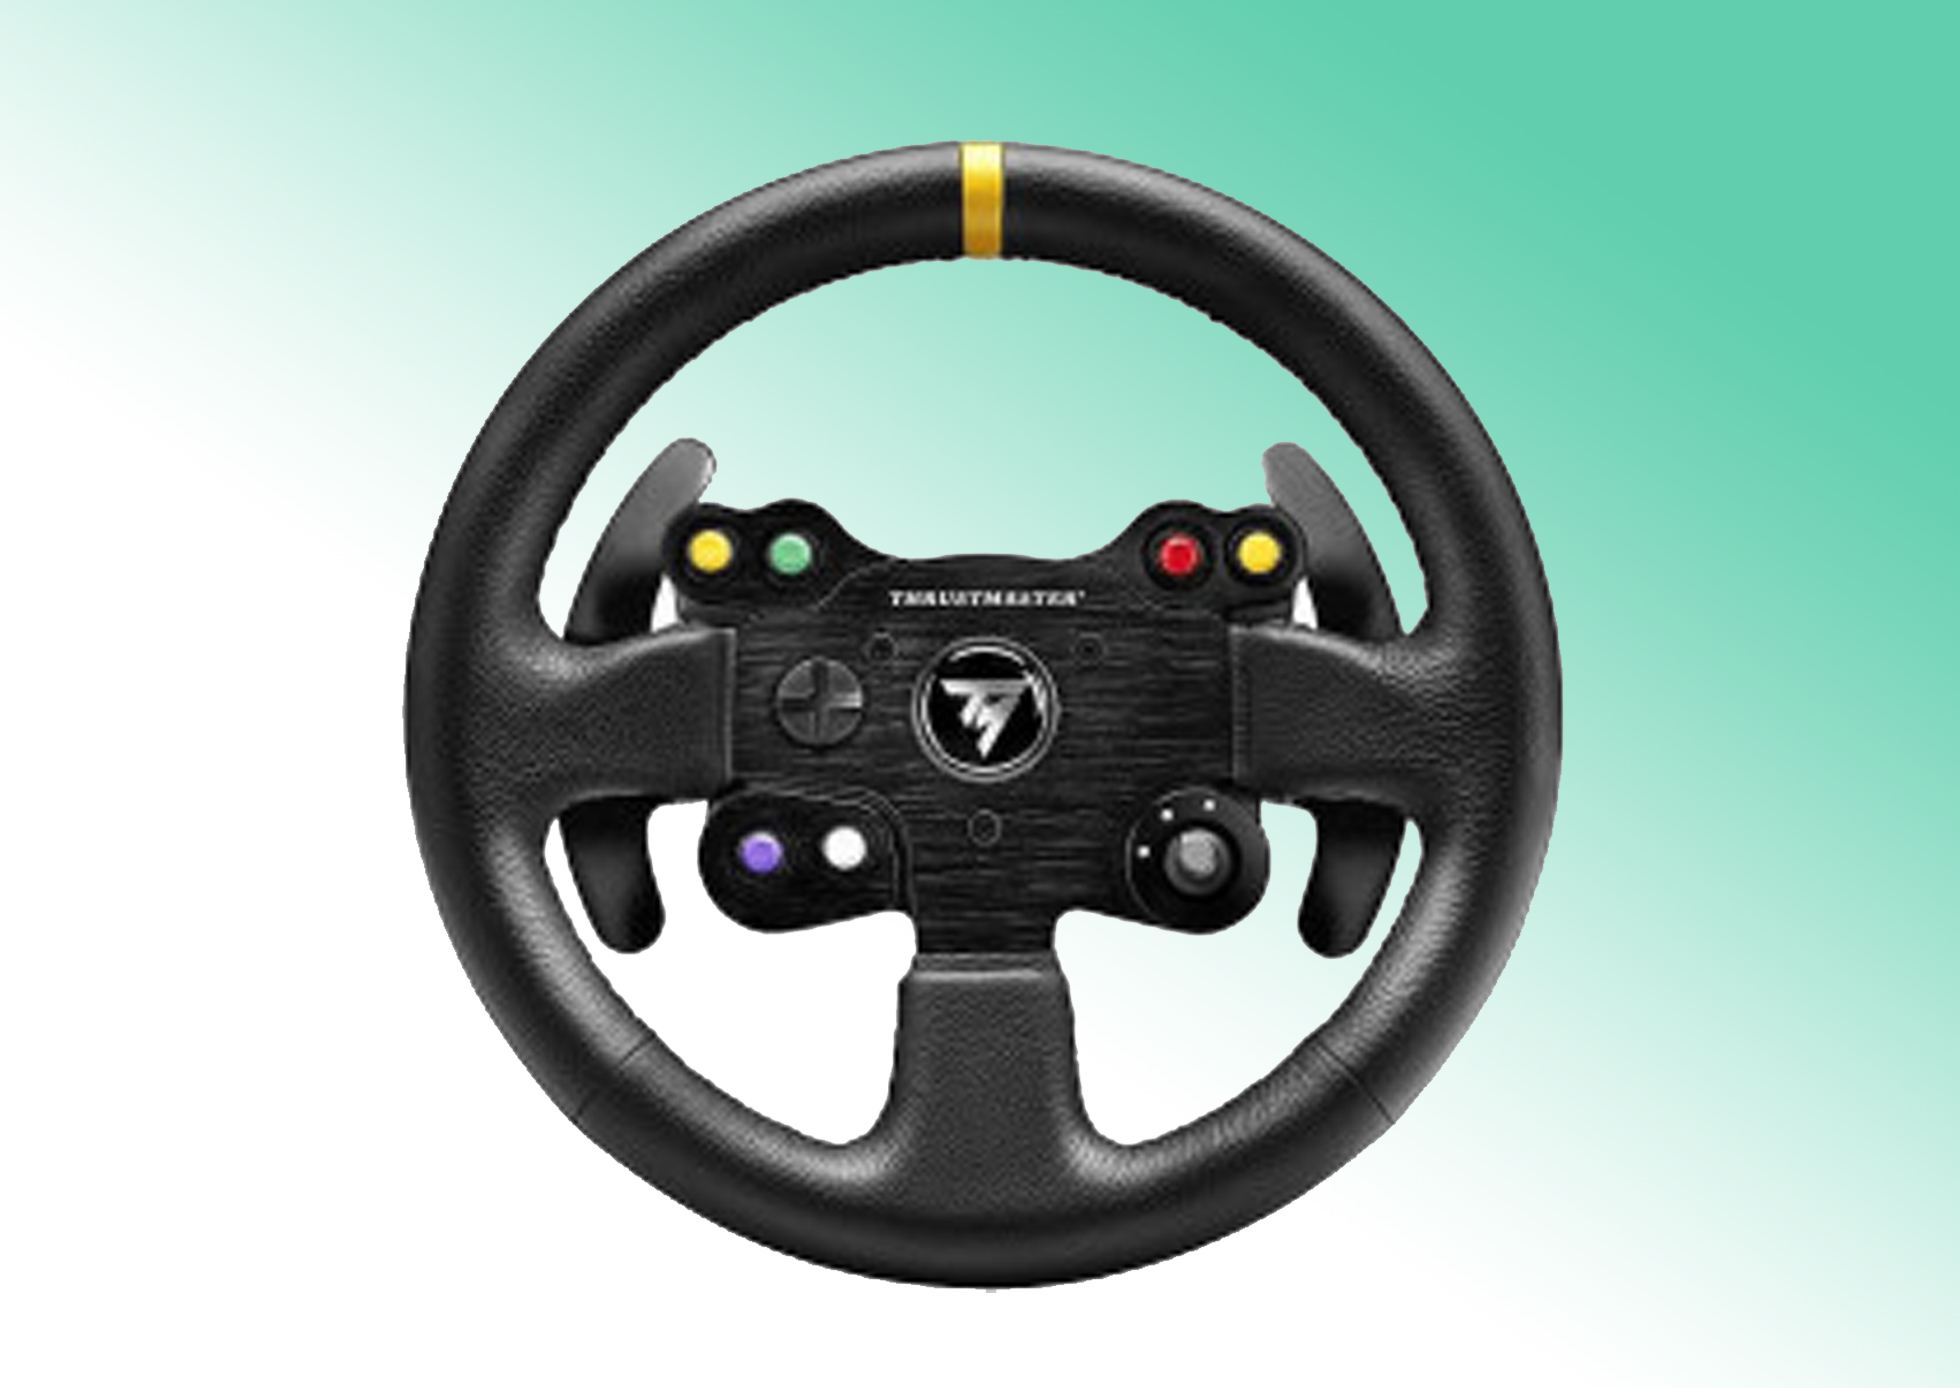 Test and Reviews of the Thrustmaster TX Racing Wheel Leather Edition